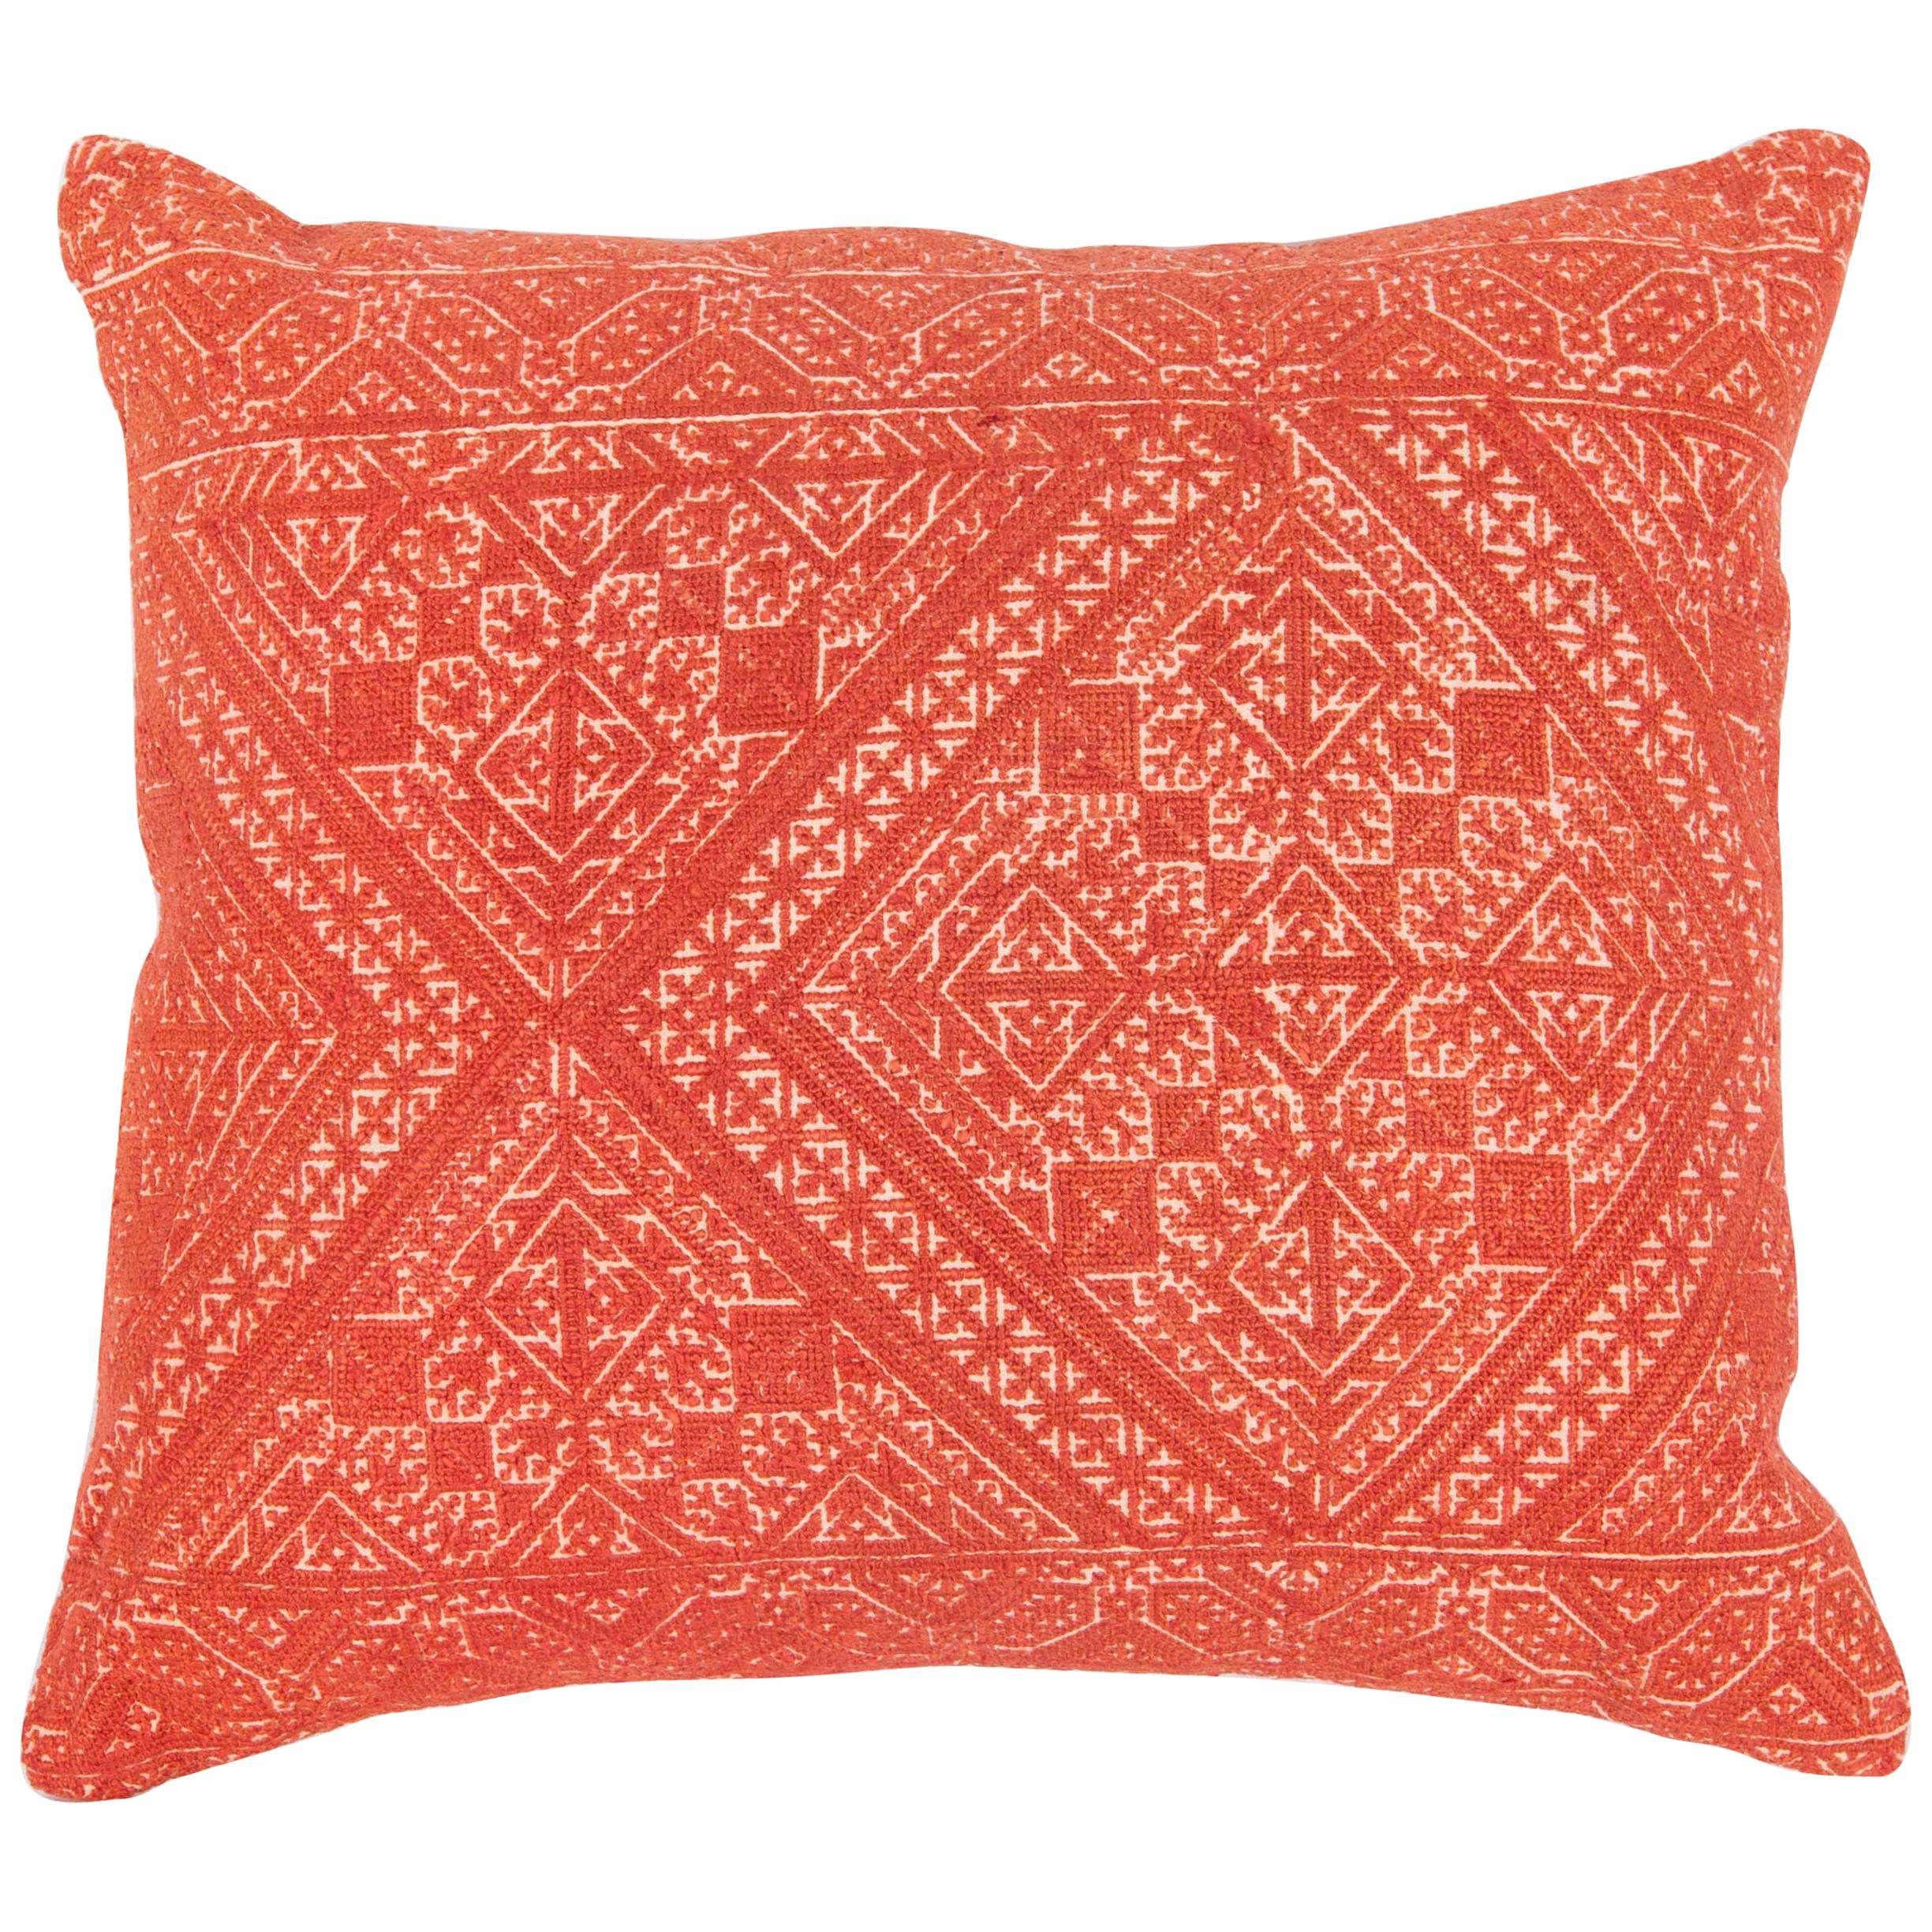 Pillow Case Made from an Early 20th Century Fez Embroidery from Morocco For Sale